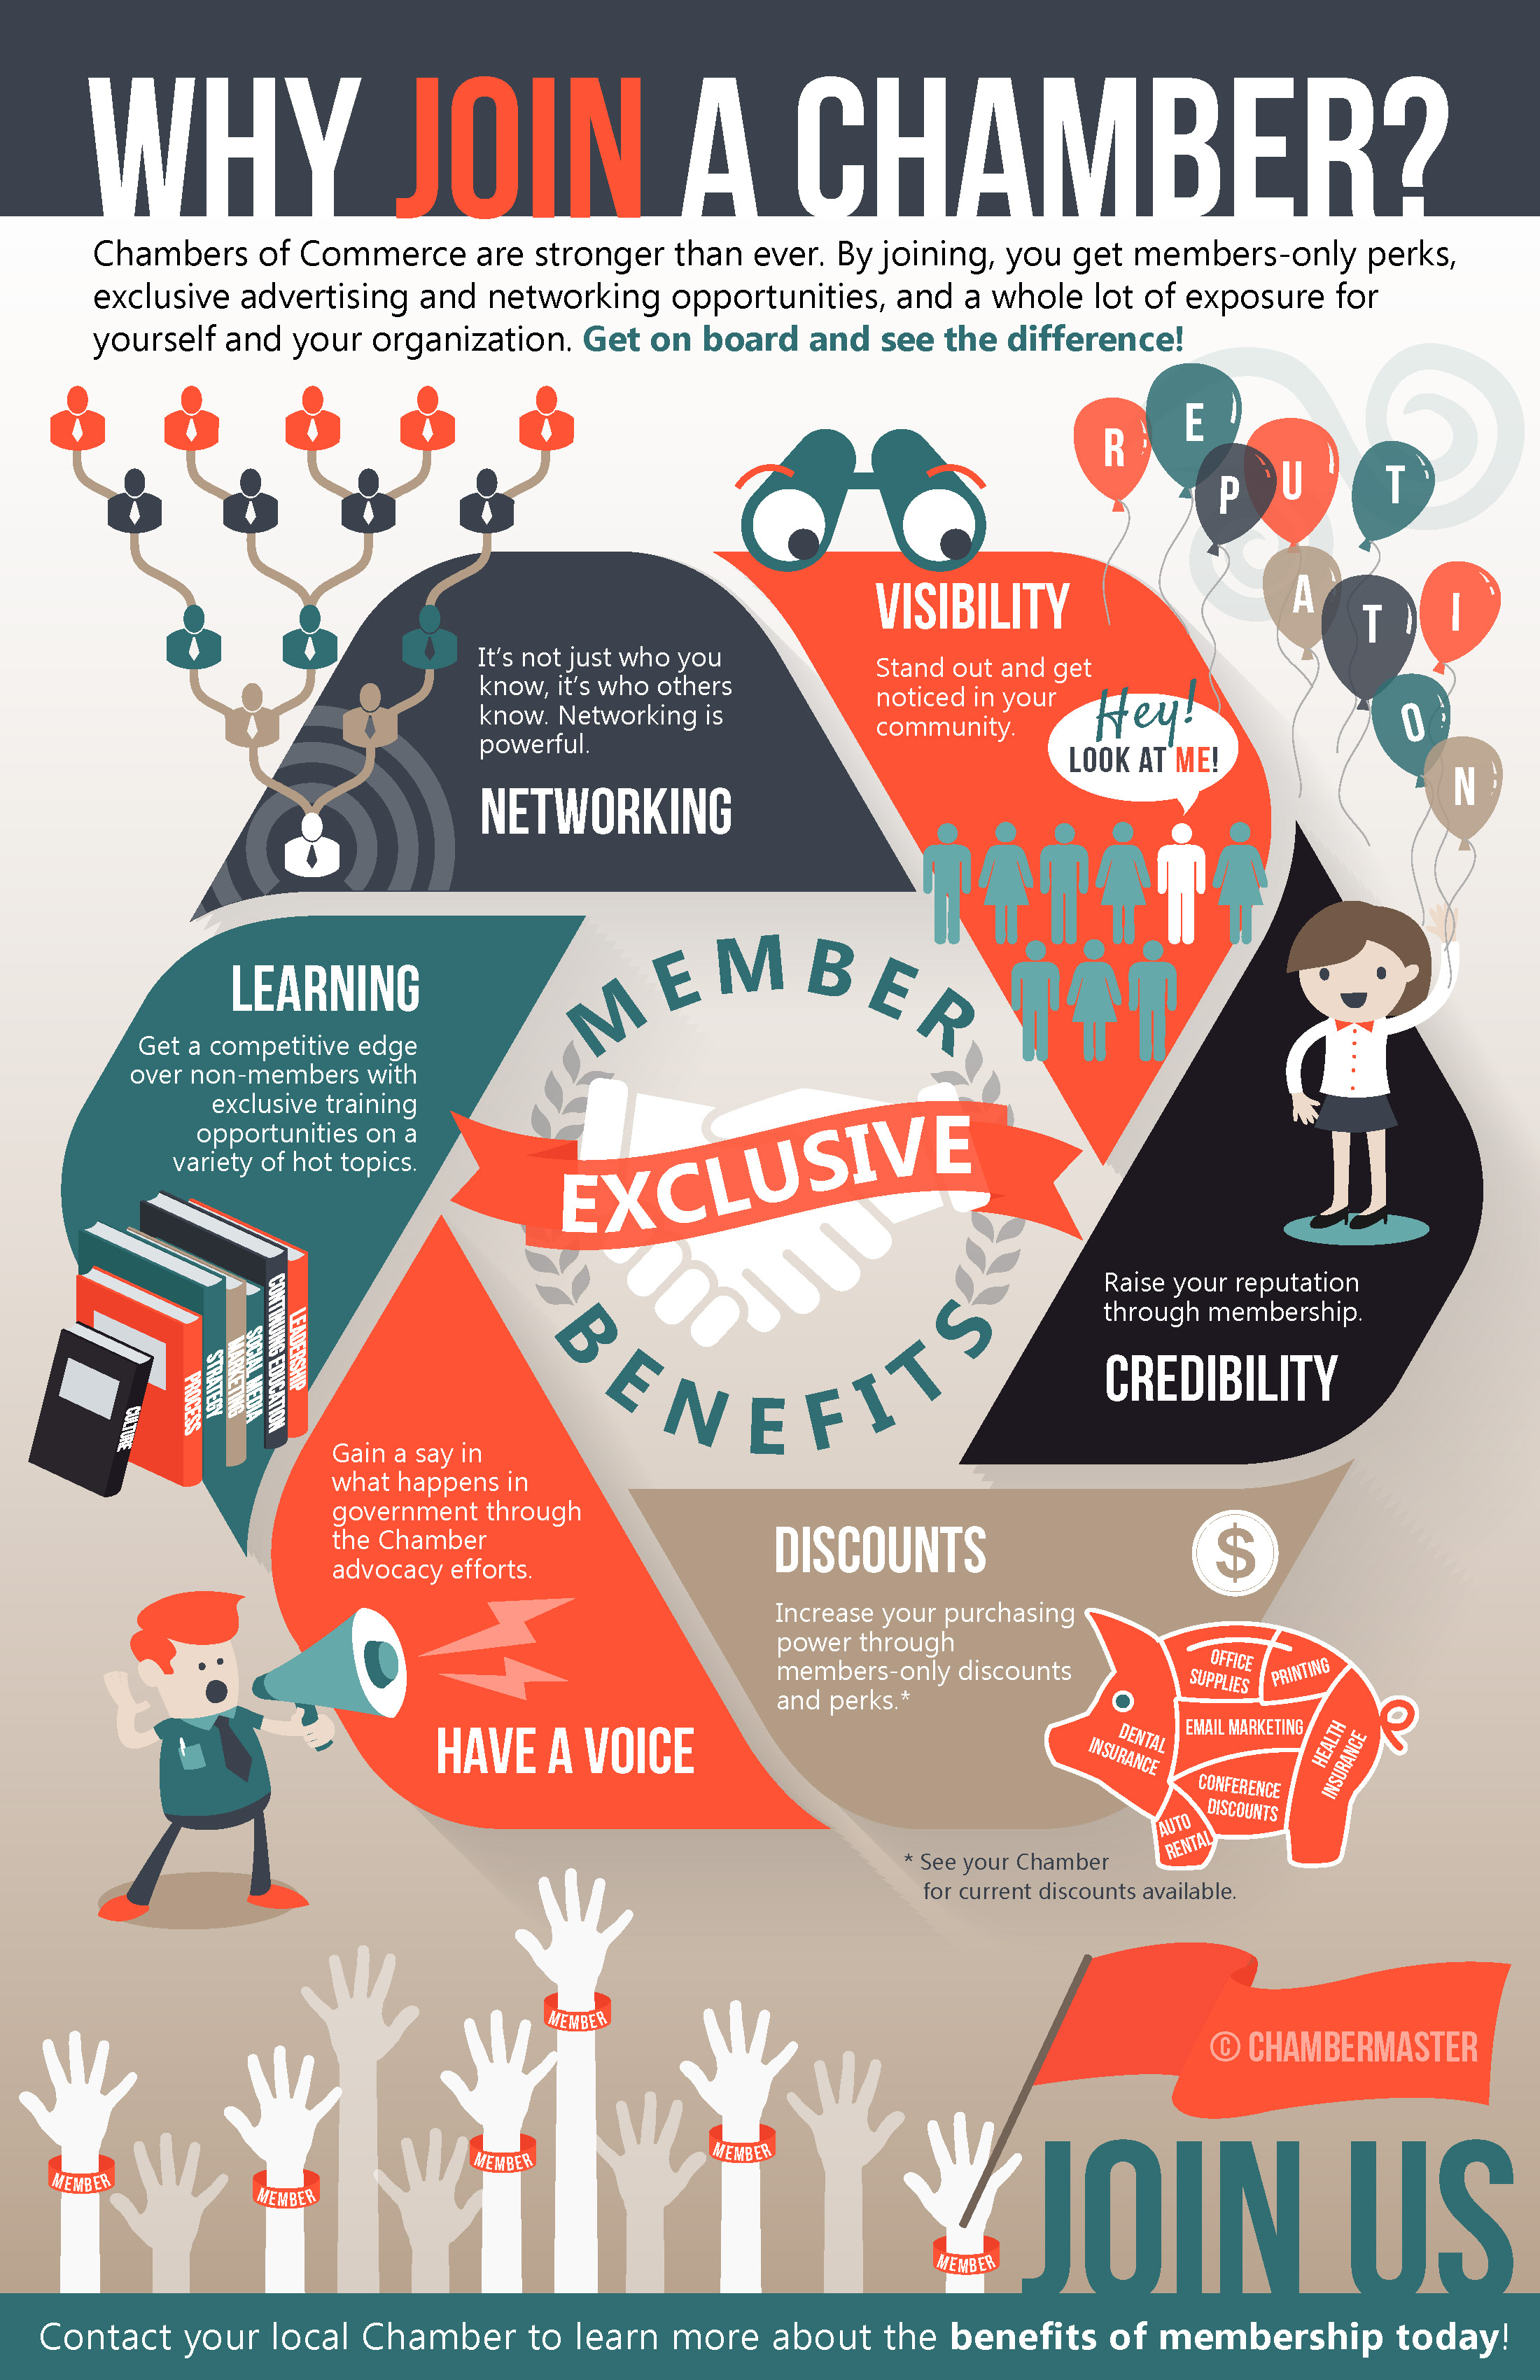 WhyJoinChamber_infographic_CM -